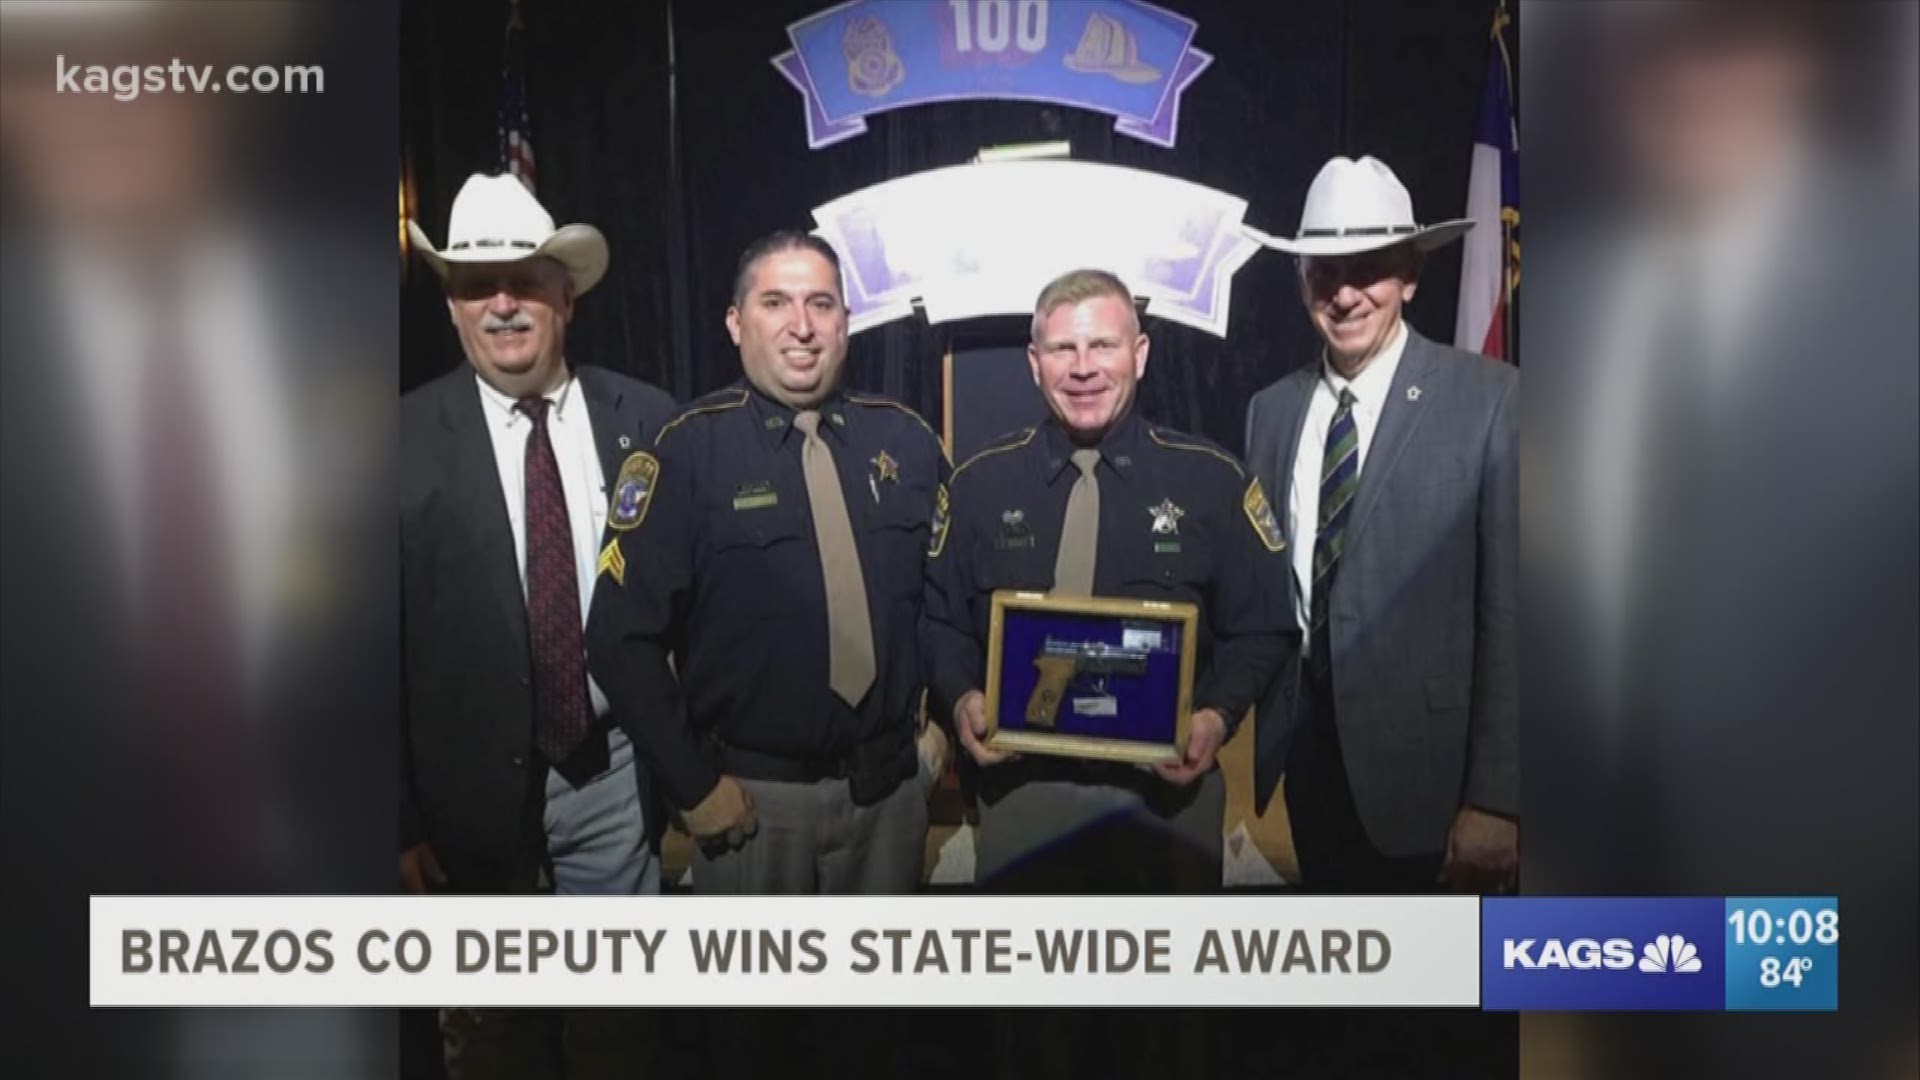 Congratulations are in order to Deputy Jerry Basey of the Brazos County Sheriff's Office as he was awarded Officer of The Year by the Texas 100 Club.